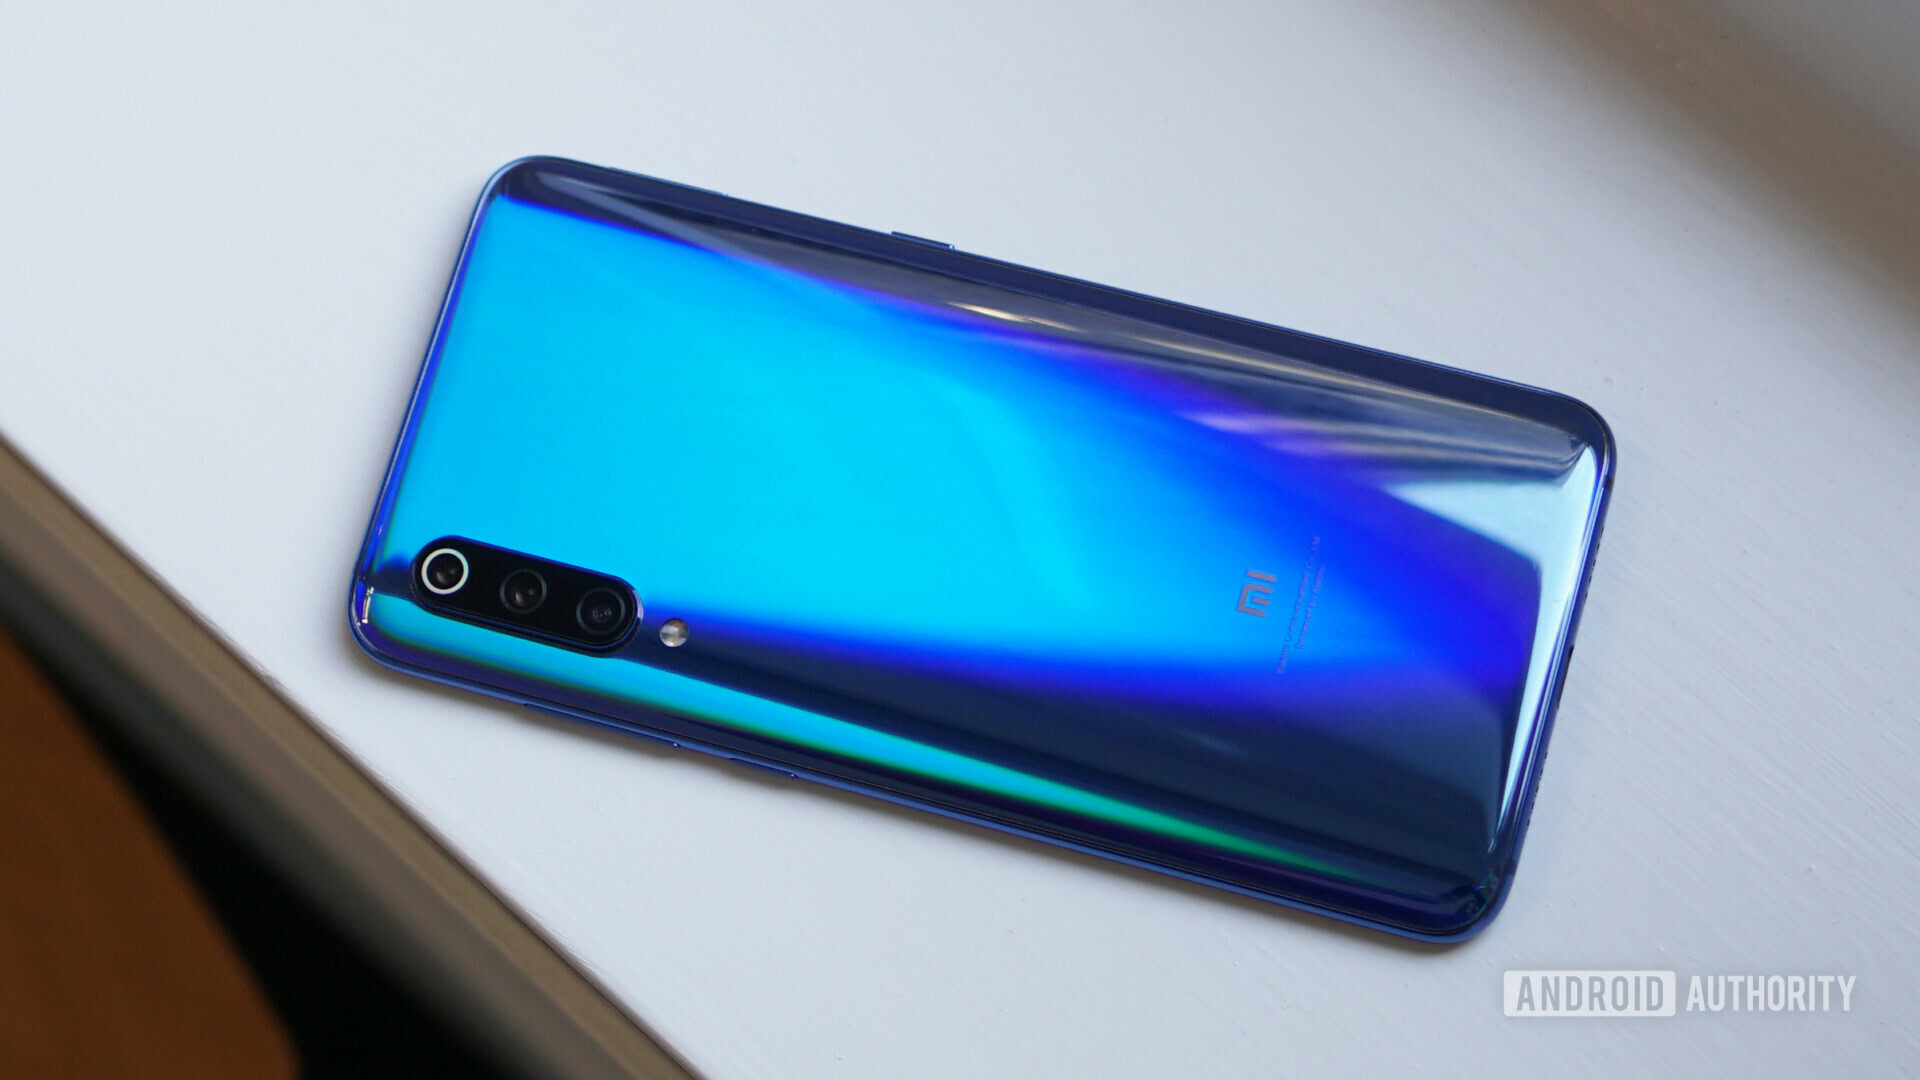 5 things we love about the Xiaomi Redmi 9A and Redmi 9C